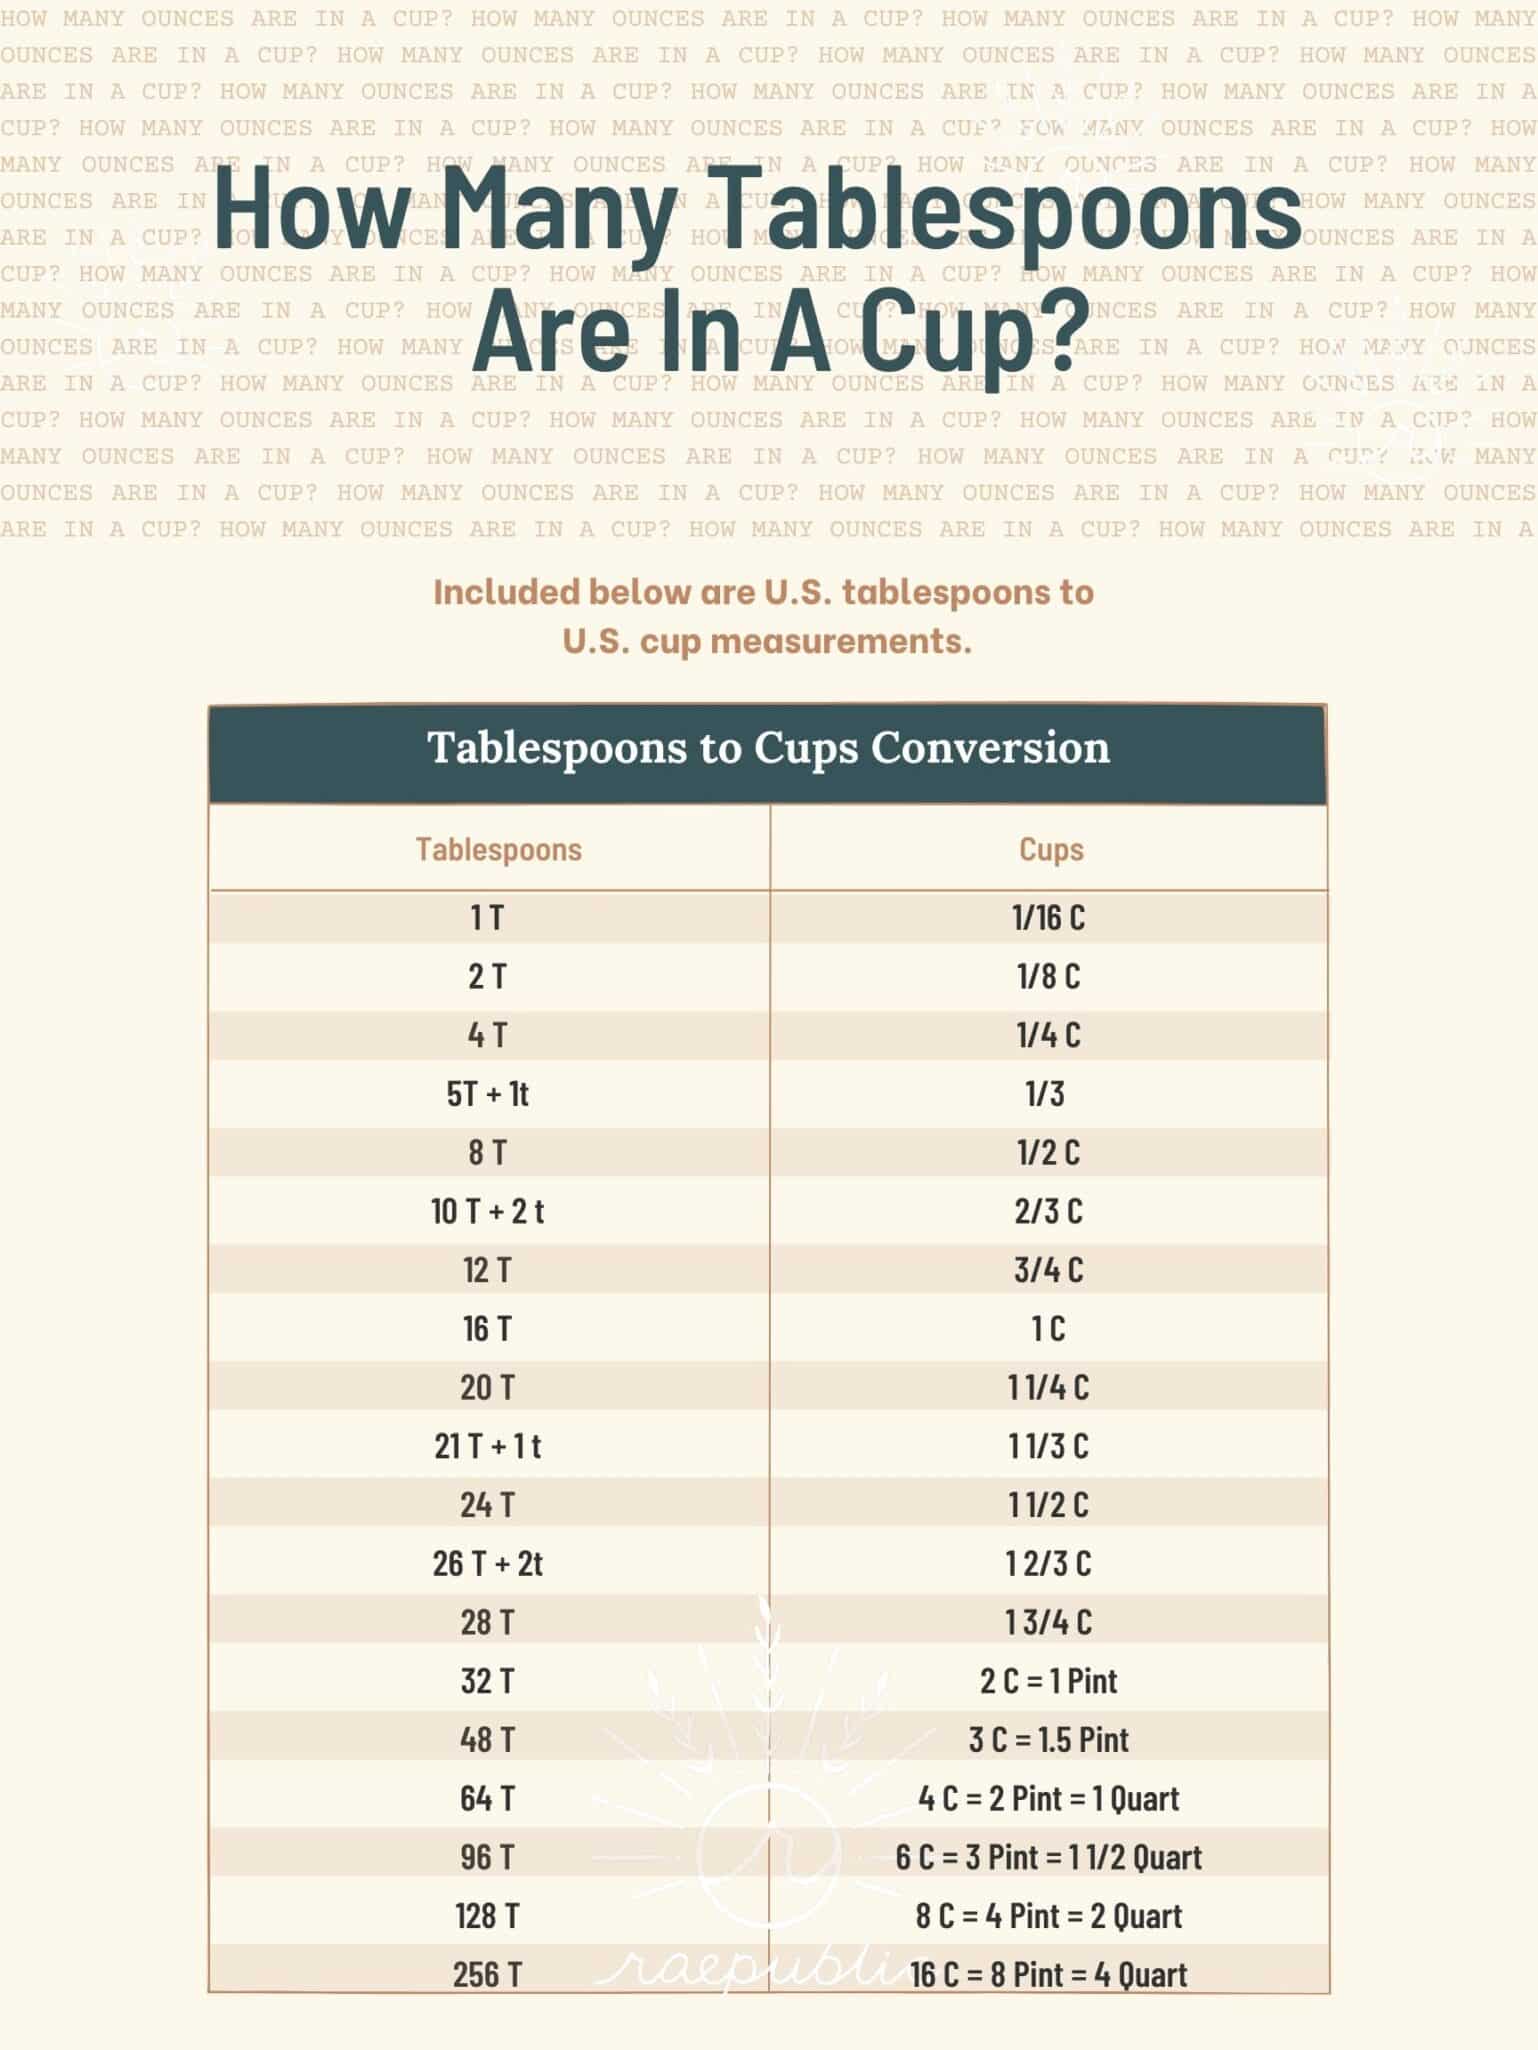 How Many Tablespoons Are in 3/4 Cup? : u/thesuntrapp